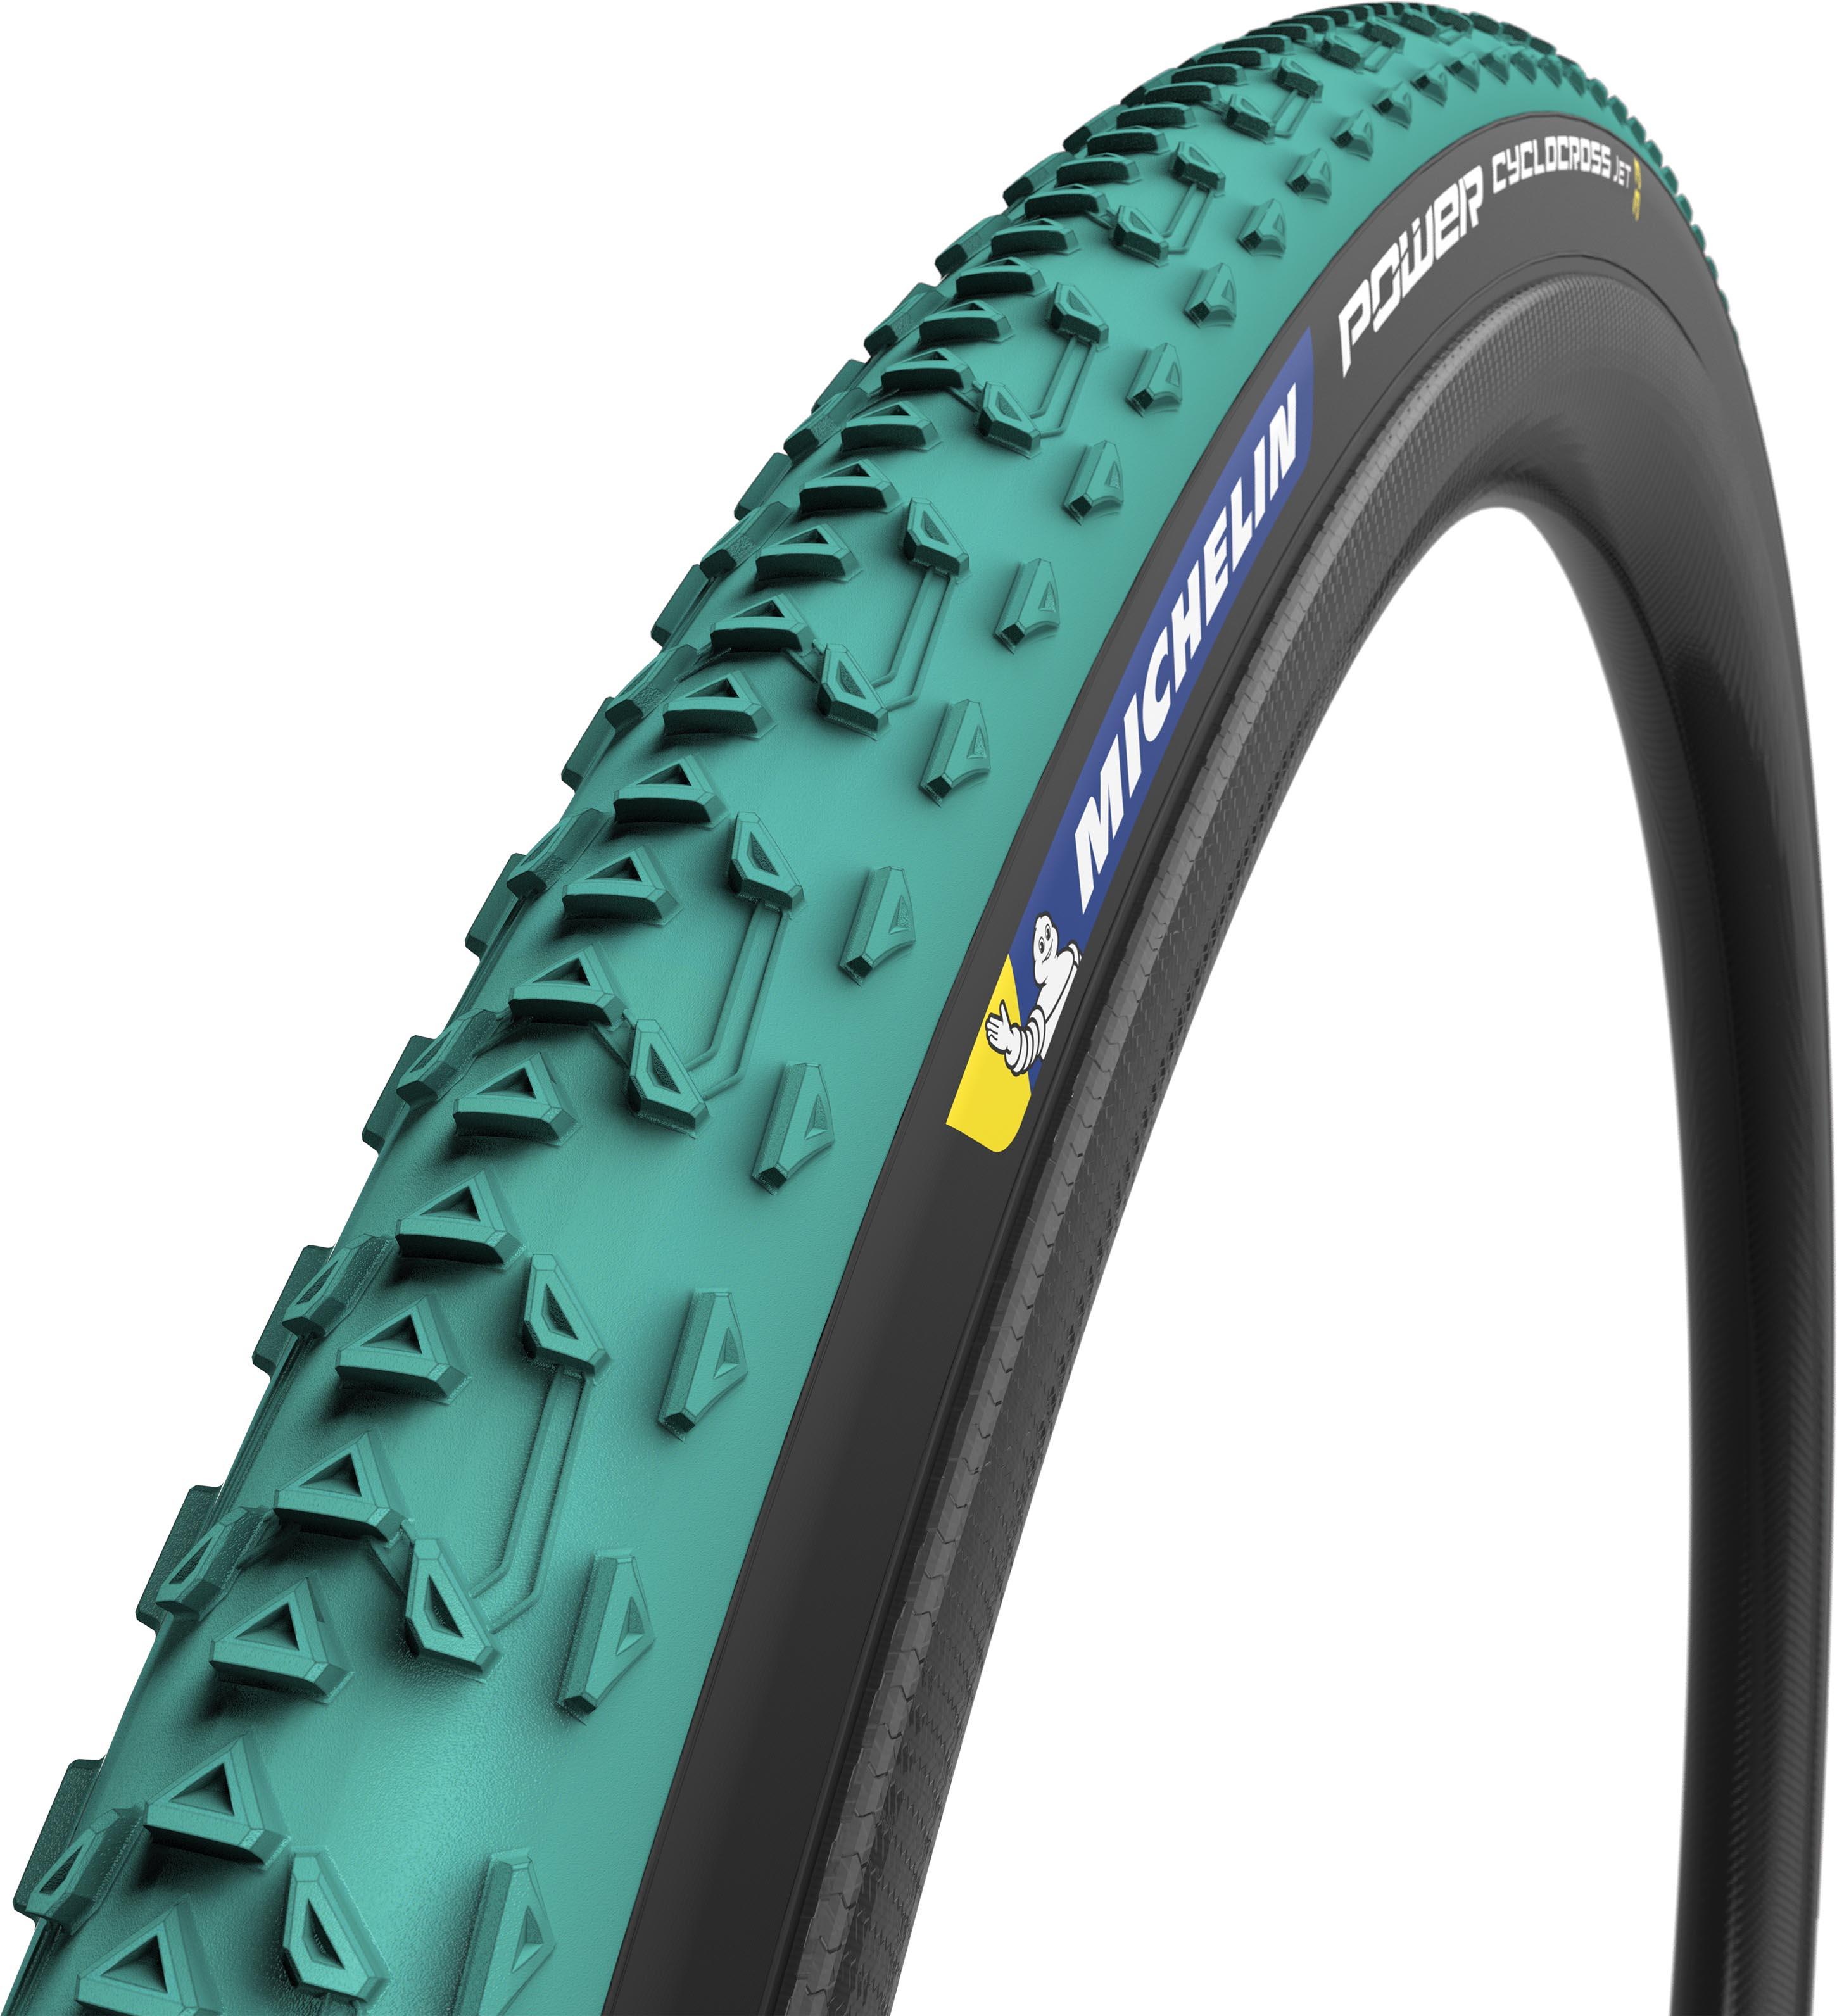 Michelin Power Cyclocross Jet Tlr Ts Tyre - Black/green